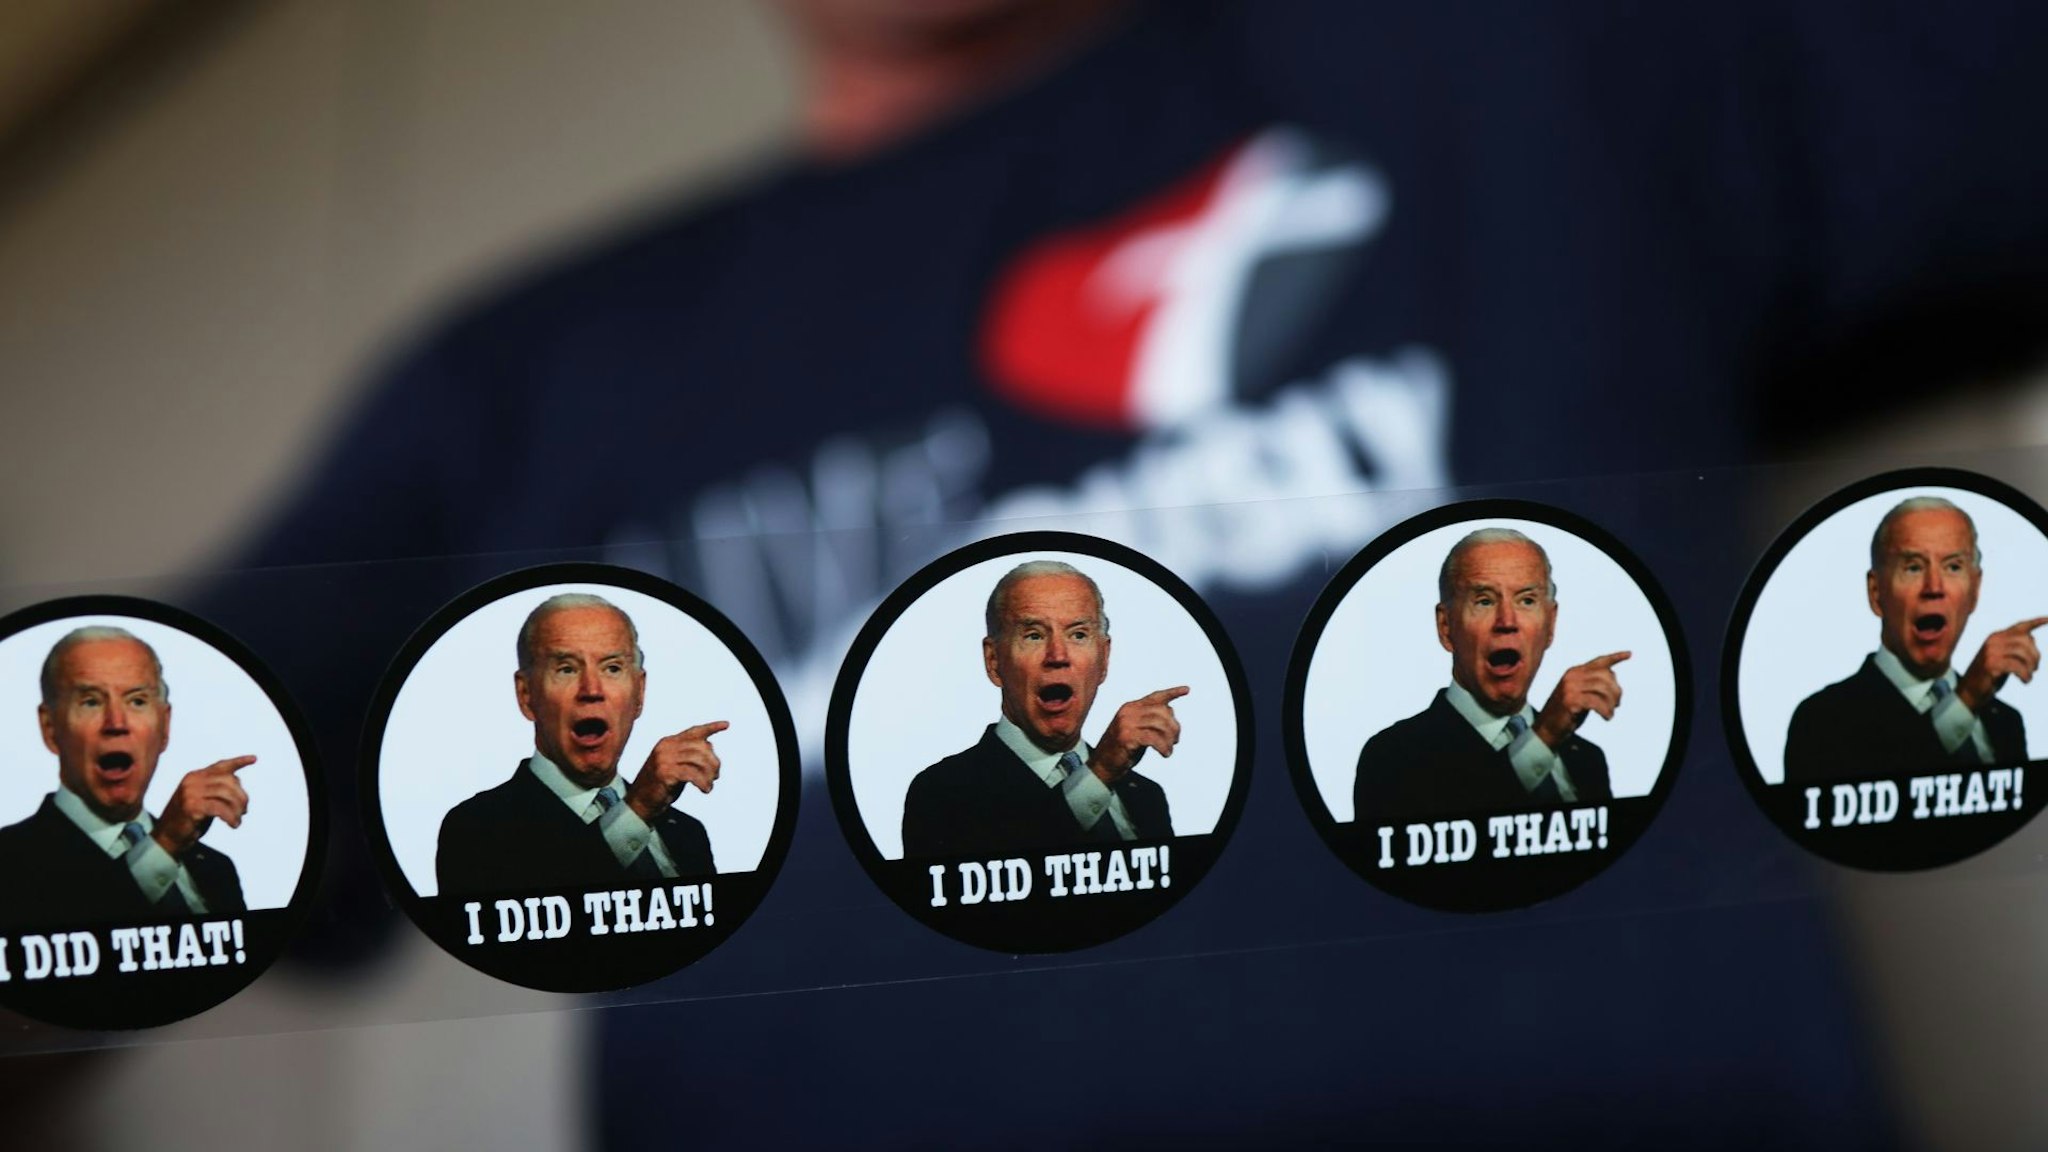 HARLEYSVILLE, PENNSYLVANIA - MAY 12: An attendee holds up stickers mocking President Joe Biden at a campaign event for Republican U.S. Senate candidate Dave McCormick at Leddy’s Pub on May 12, 2022 in Harleysville, Pennsylvania.